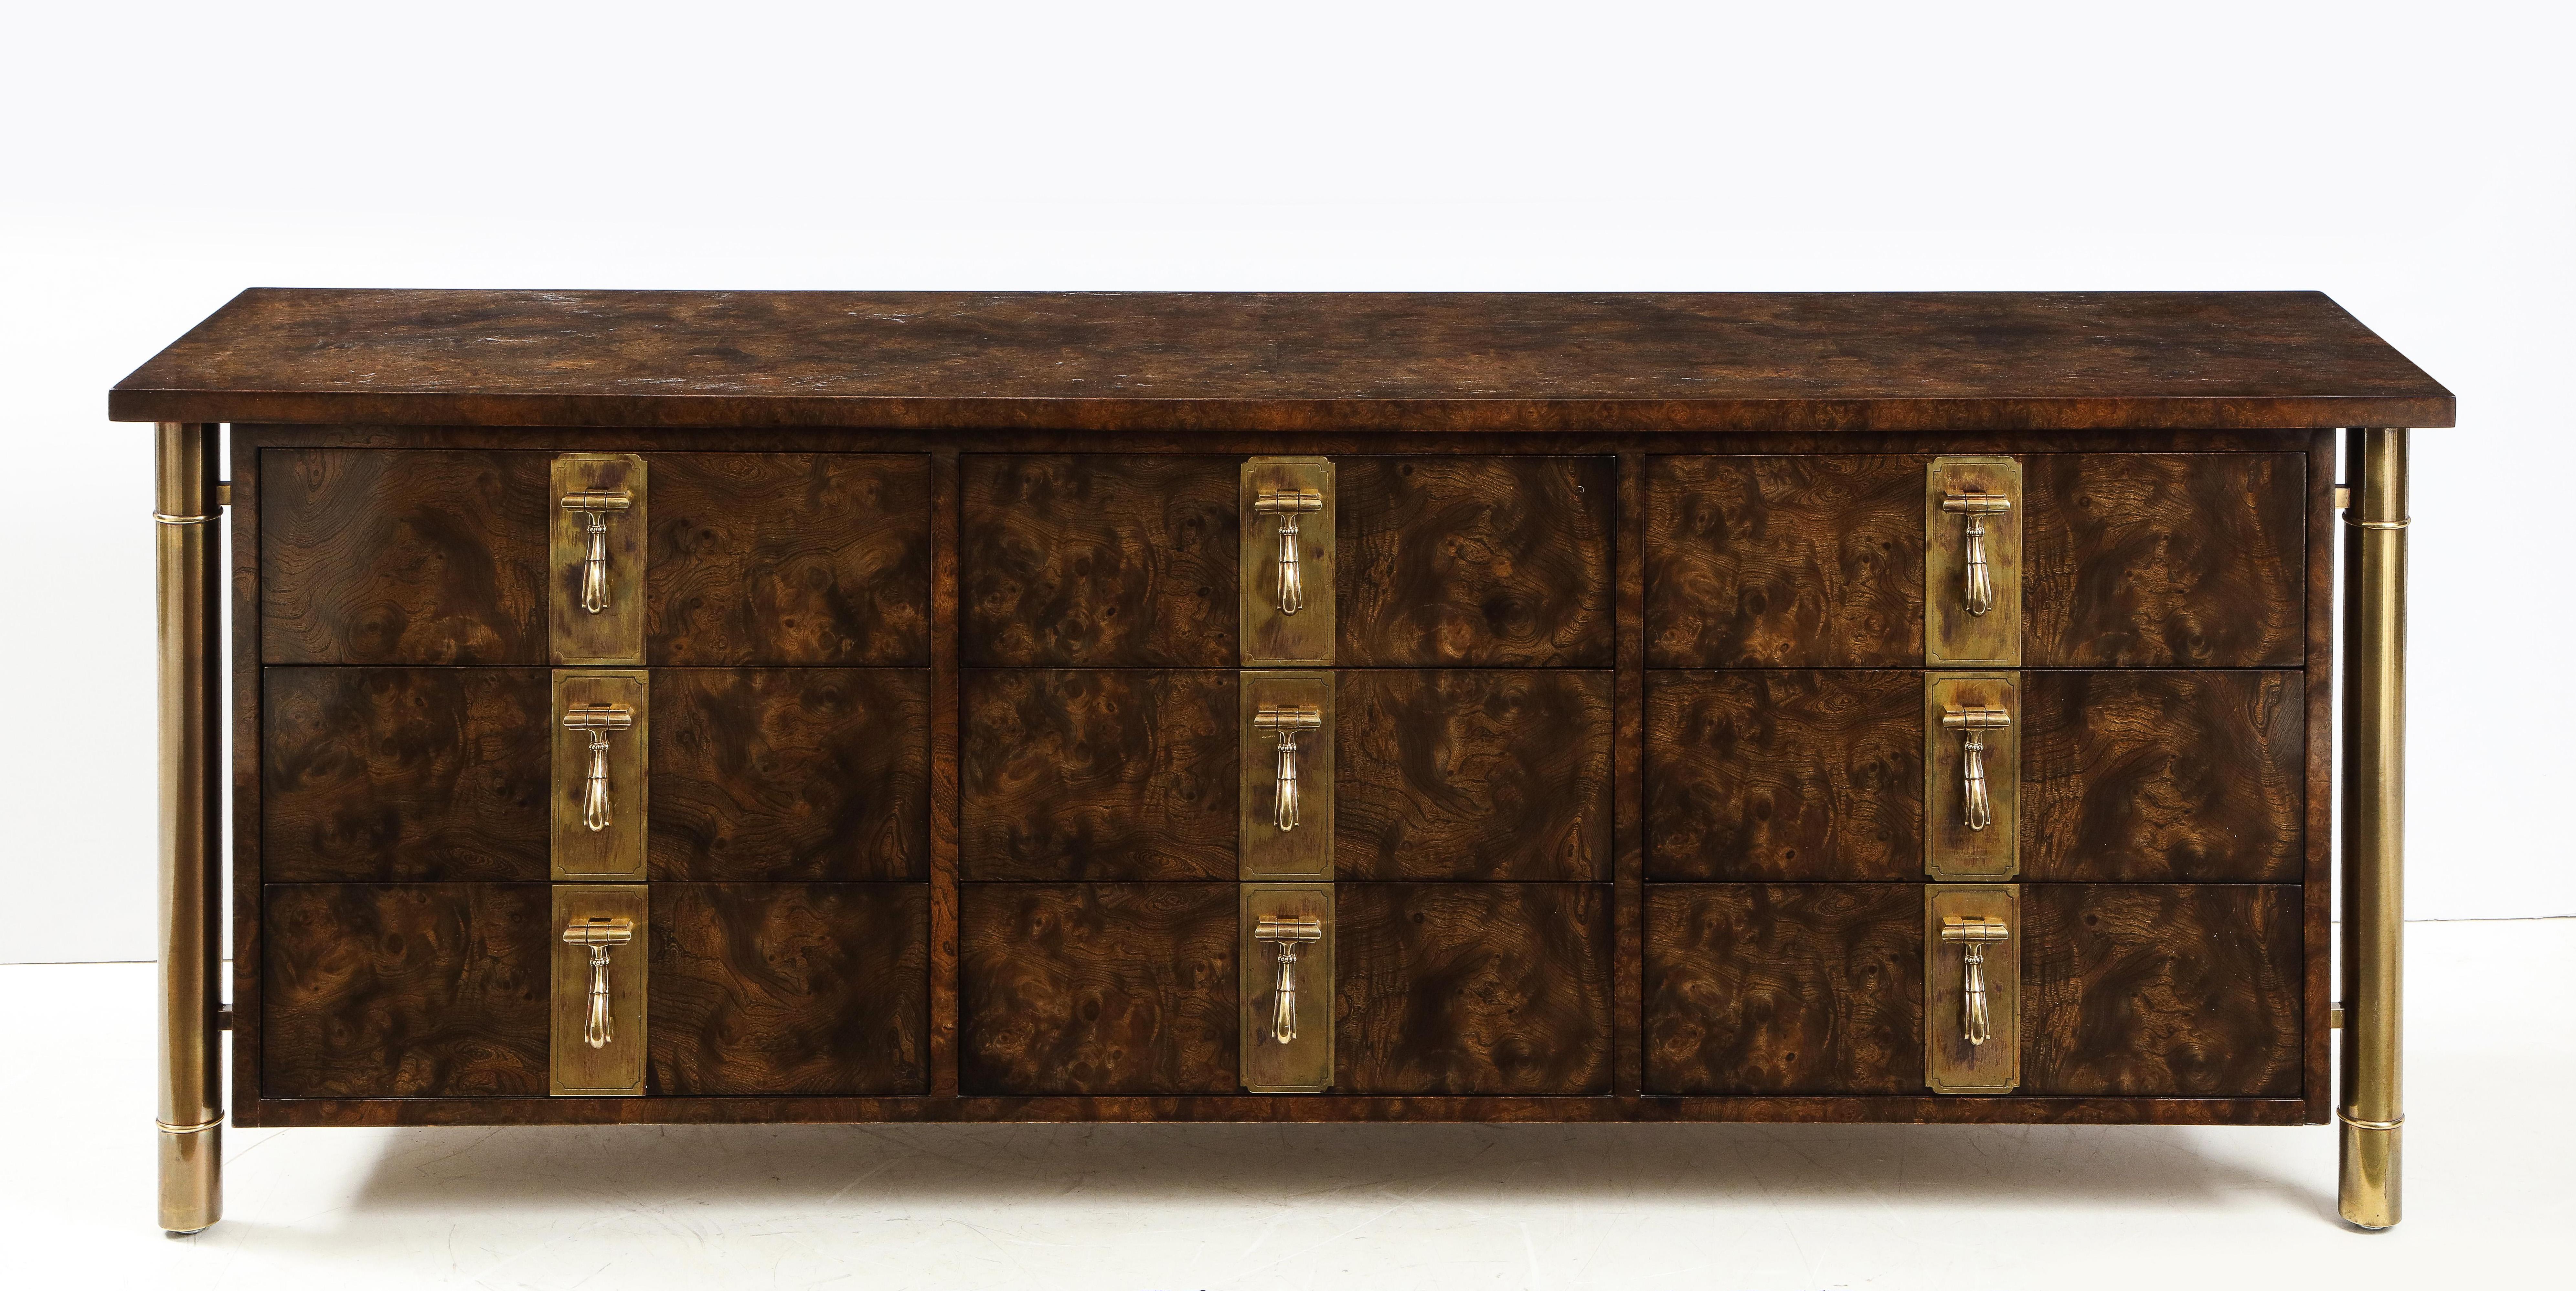 Stunning 1970s nine-drawer burl elmwood and brass hardware dresser designed by William Doezema for Mastercraft, in vintage original condition with minor wear and beautiful patina.